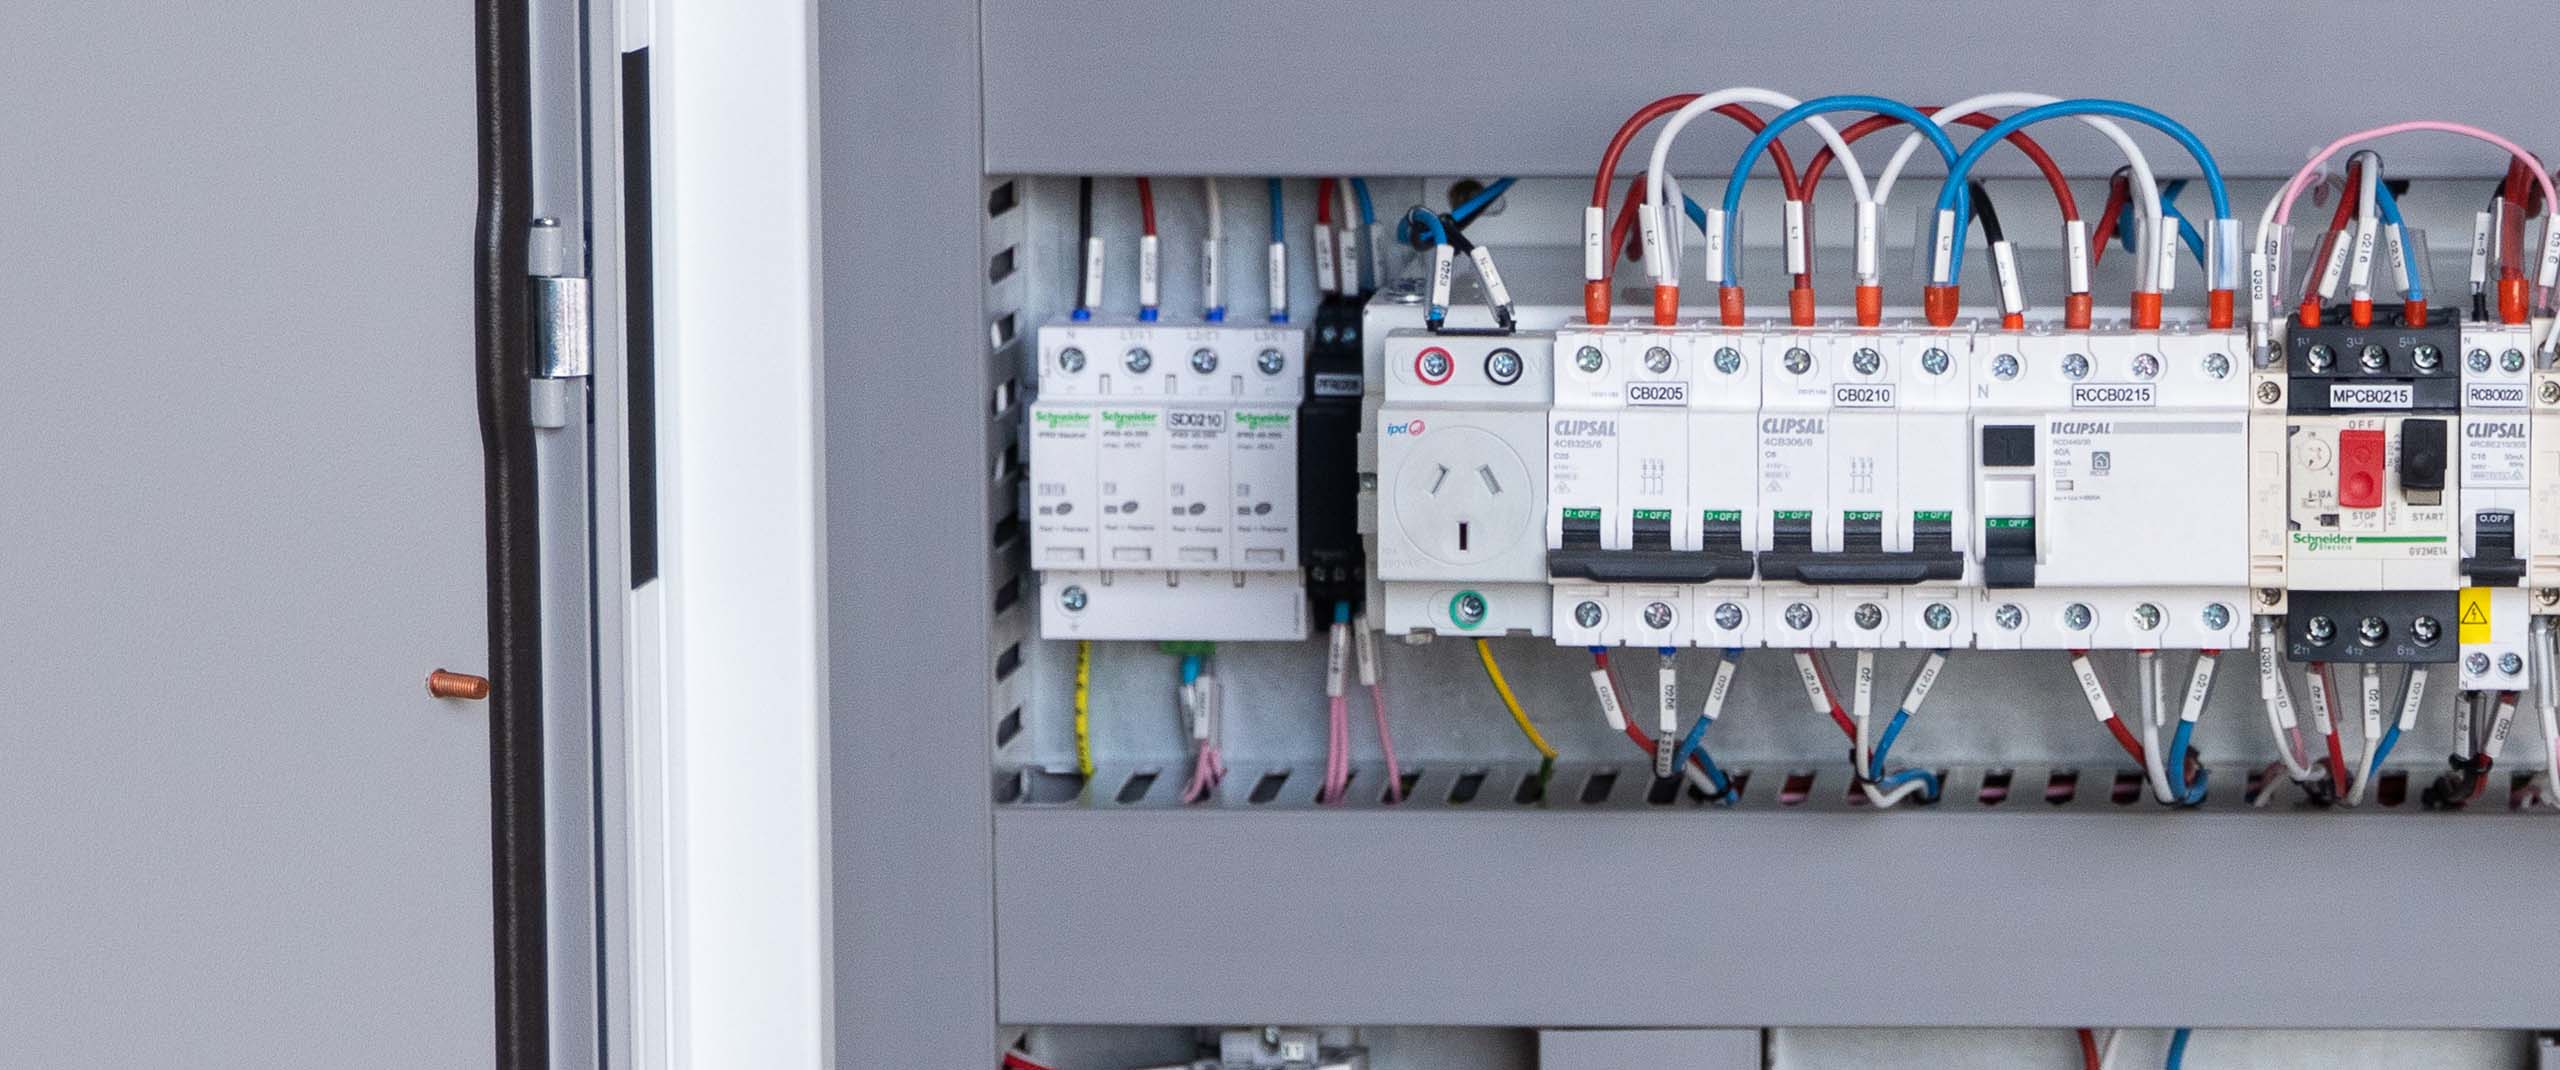 Surge protection – when should I use it